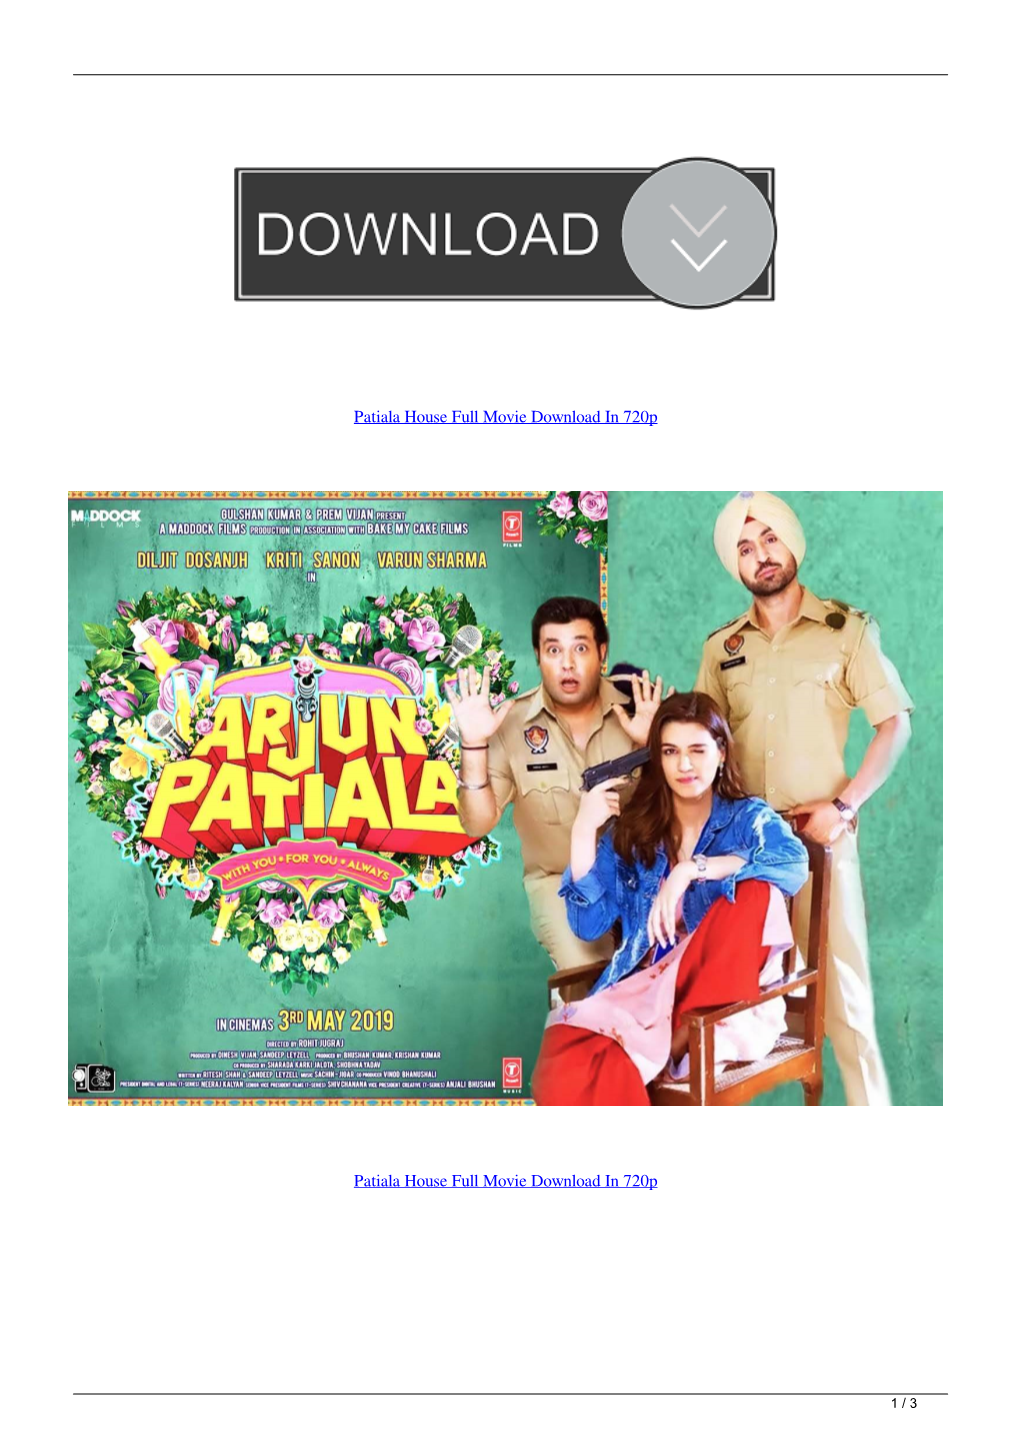 Patiala House Full Movie Download in 720P